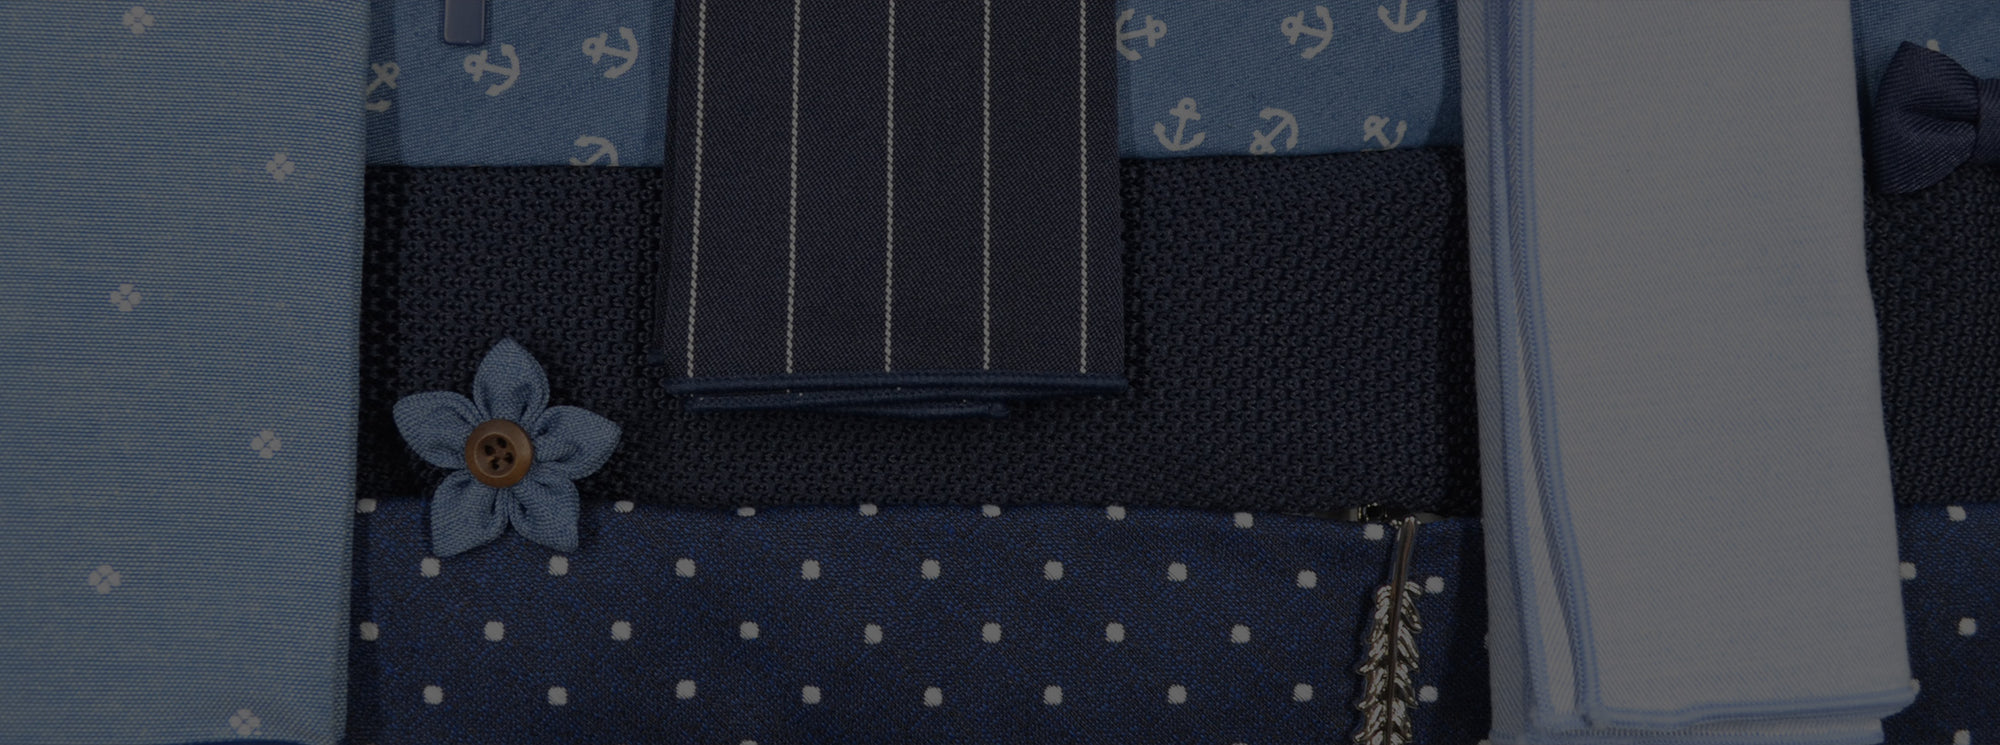 slate blue wedding ties & accessories collection